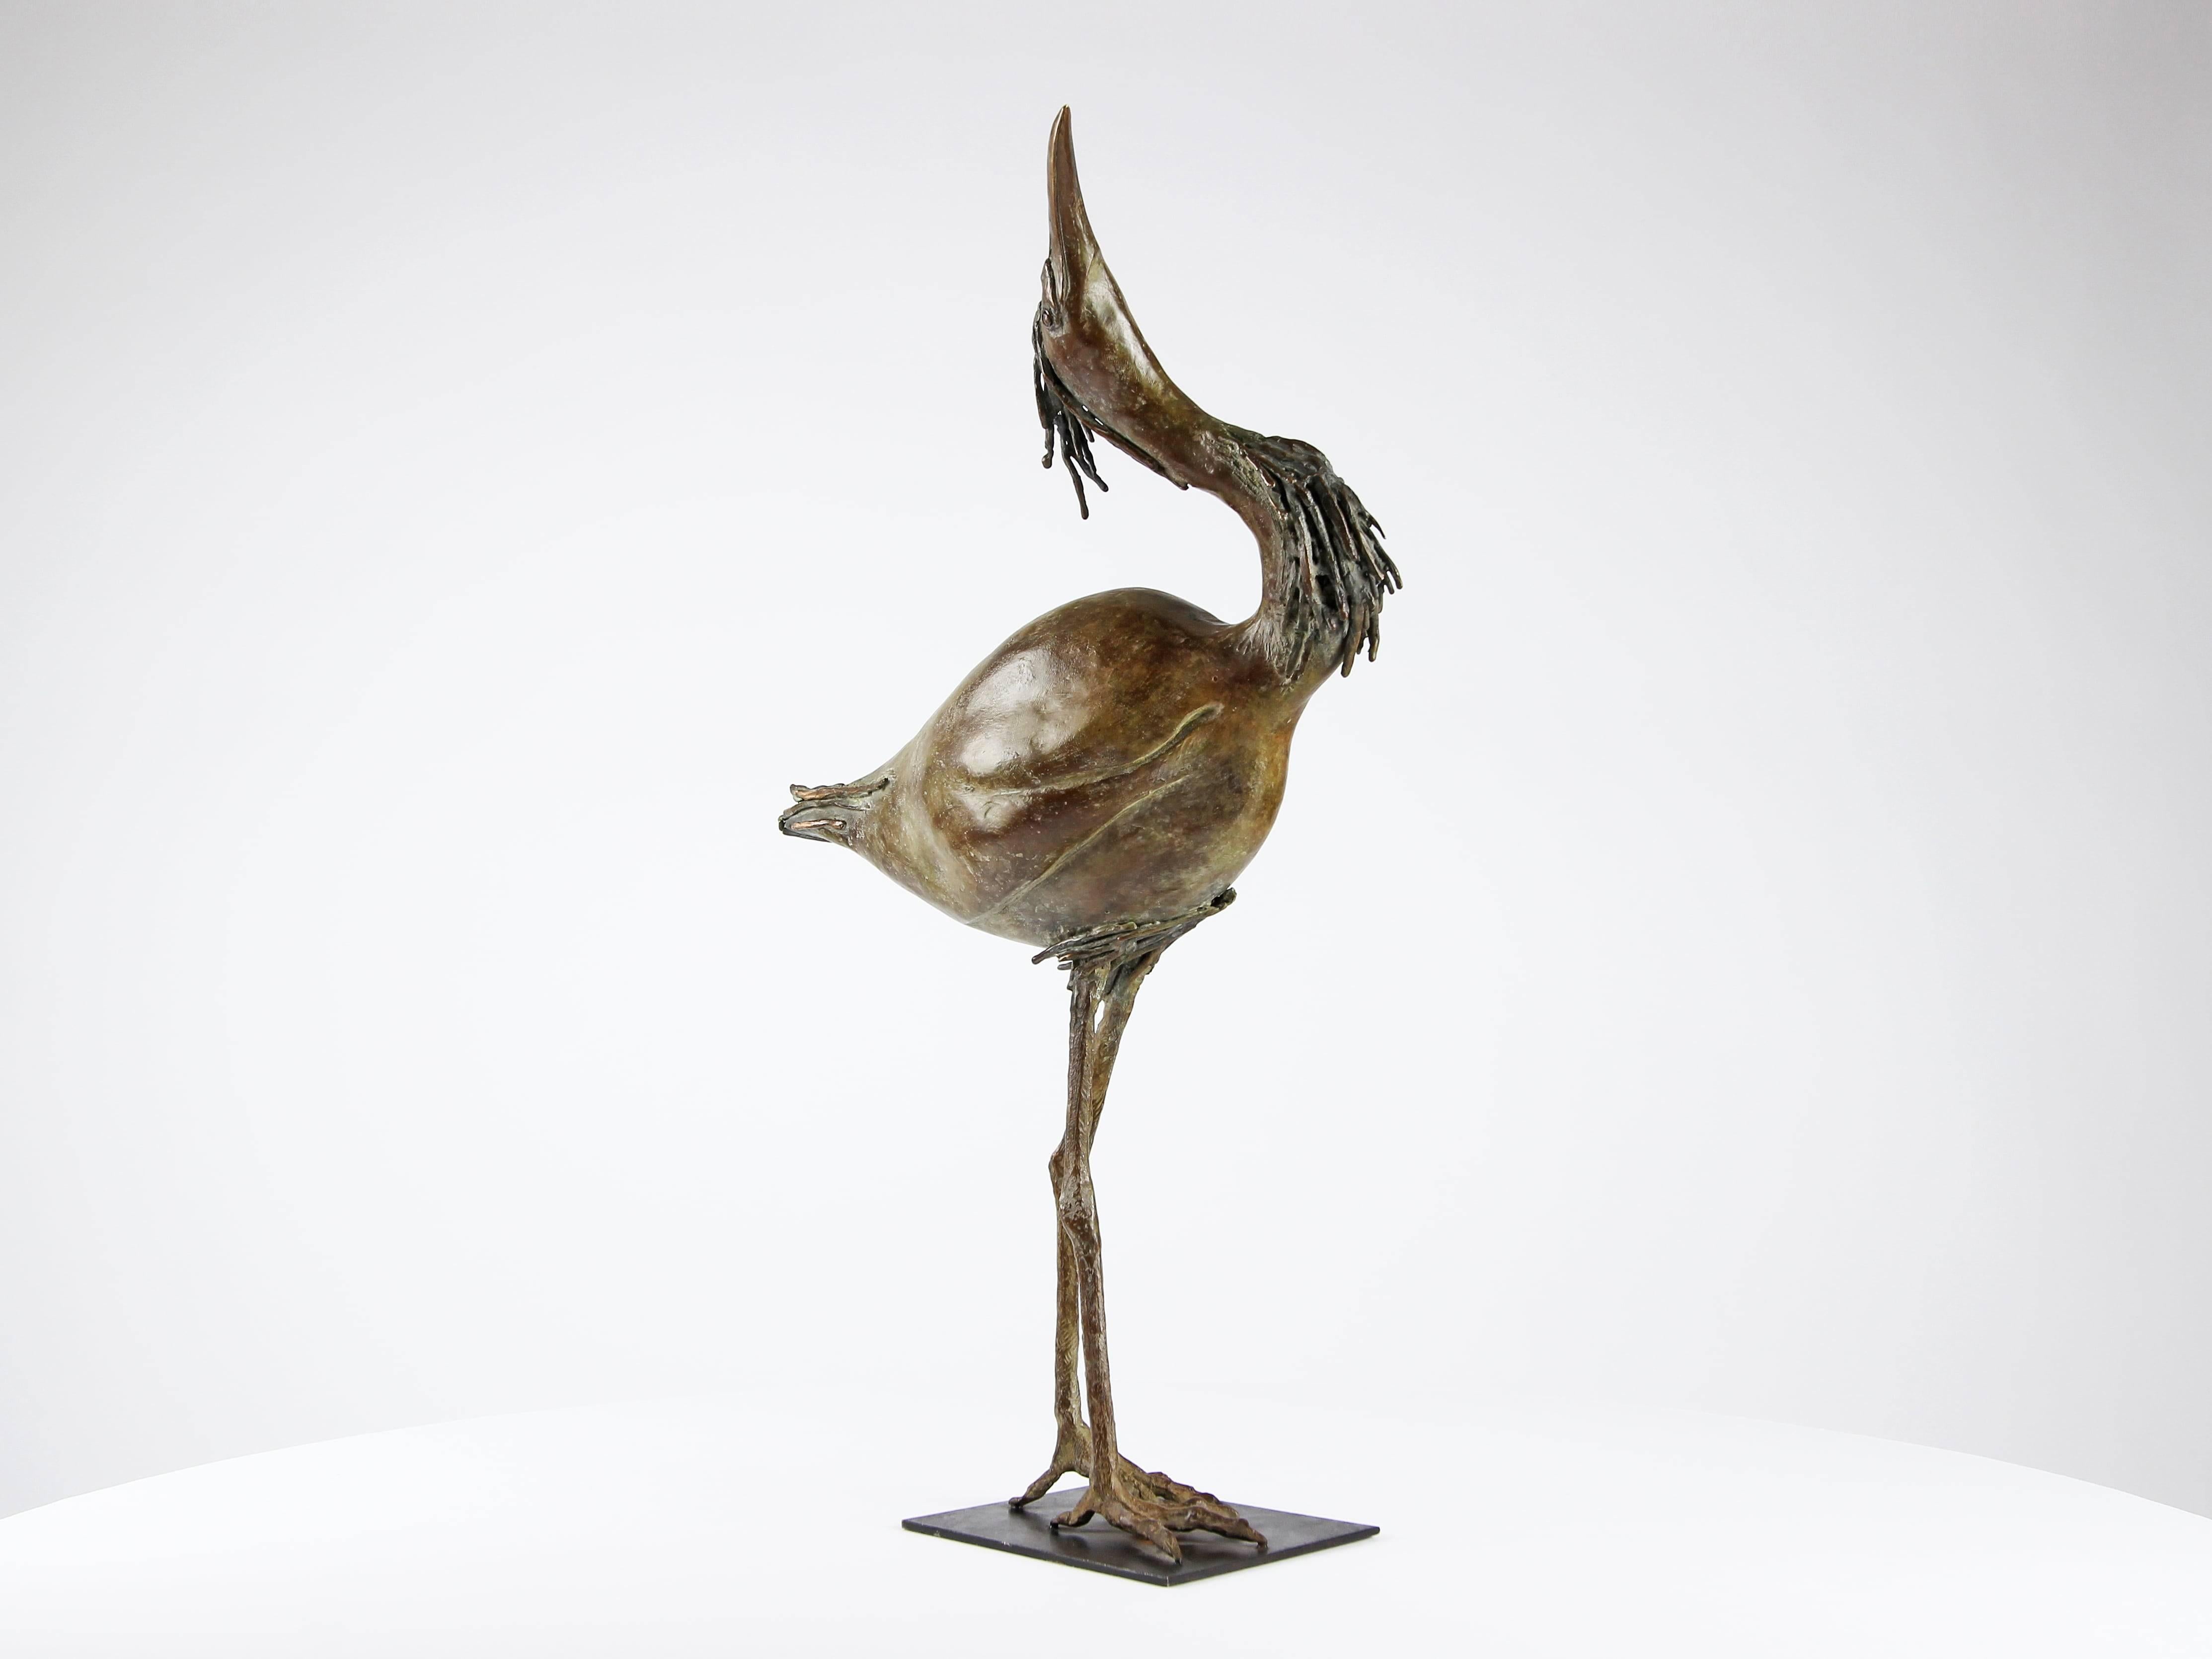 Egret by Chésade - Bronze animal sculpture of a bird, realistic, expressive For Sale 1